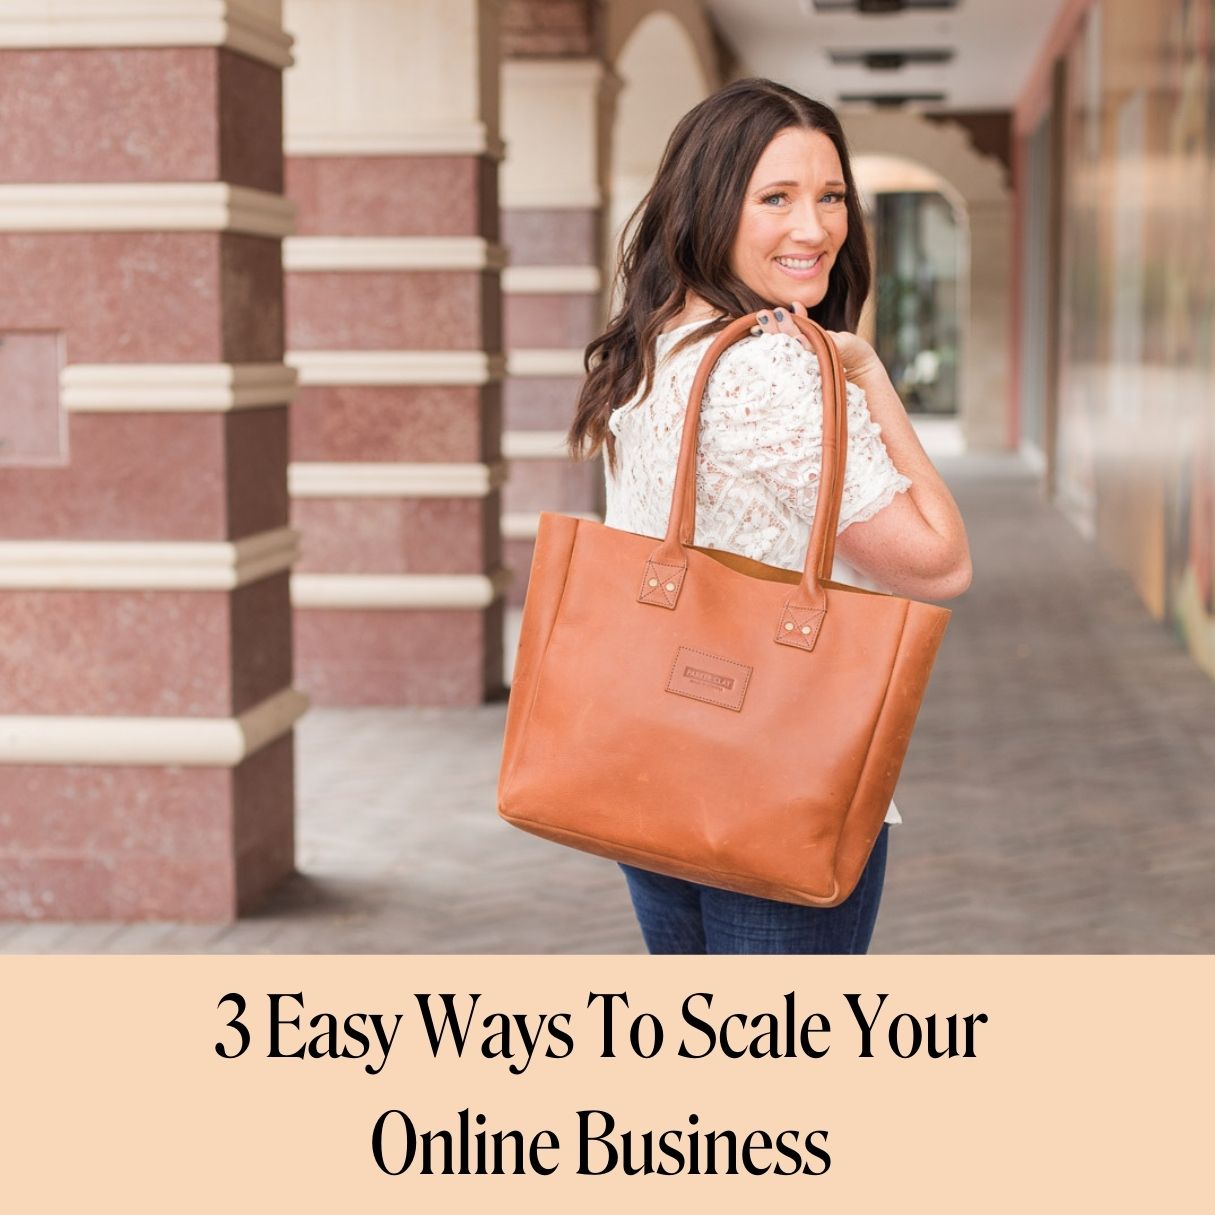 Woman business owner with leather laptop bag